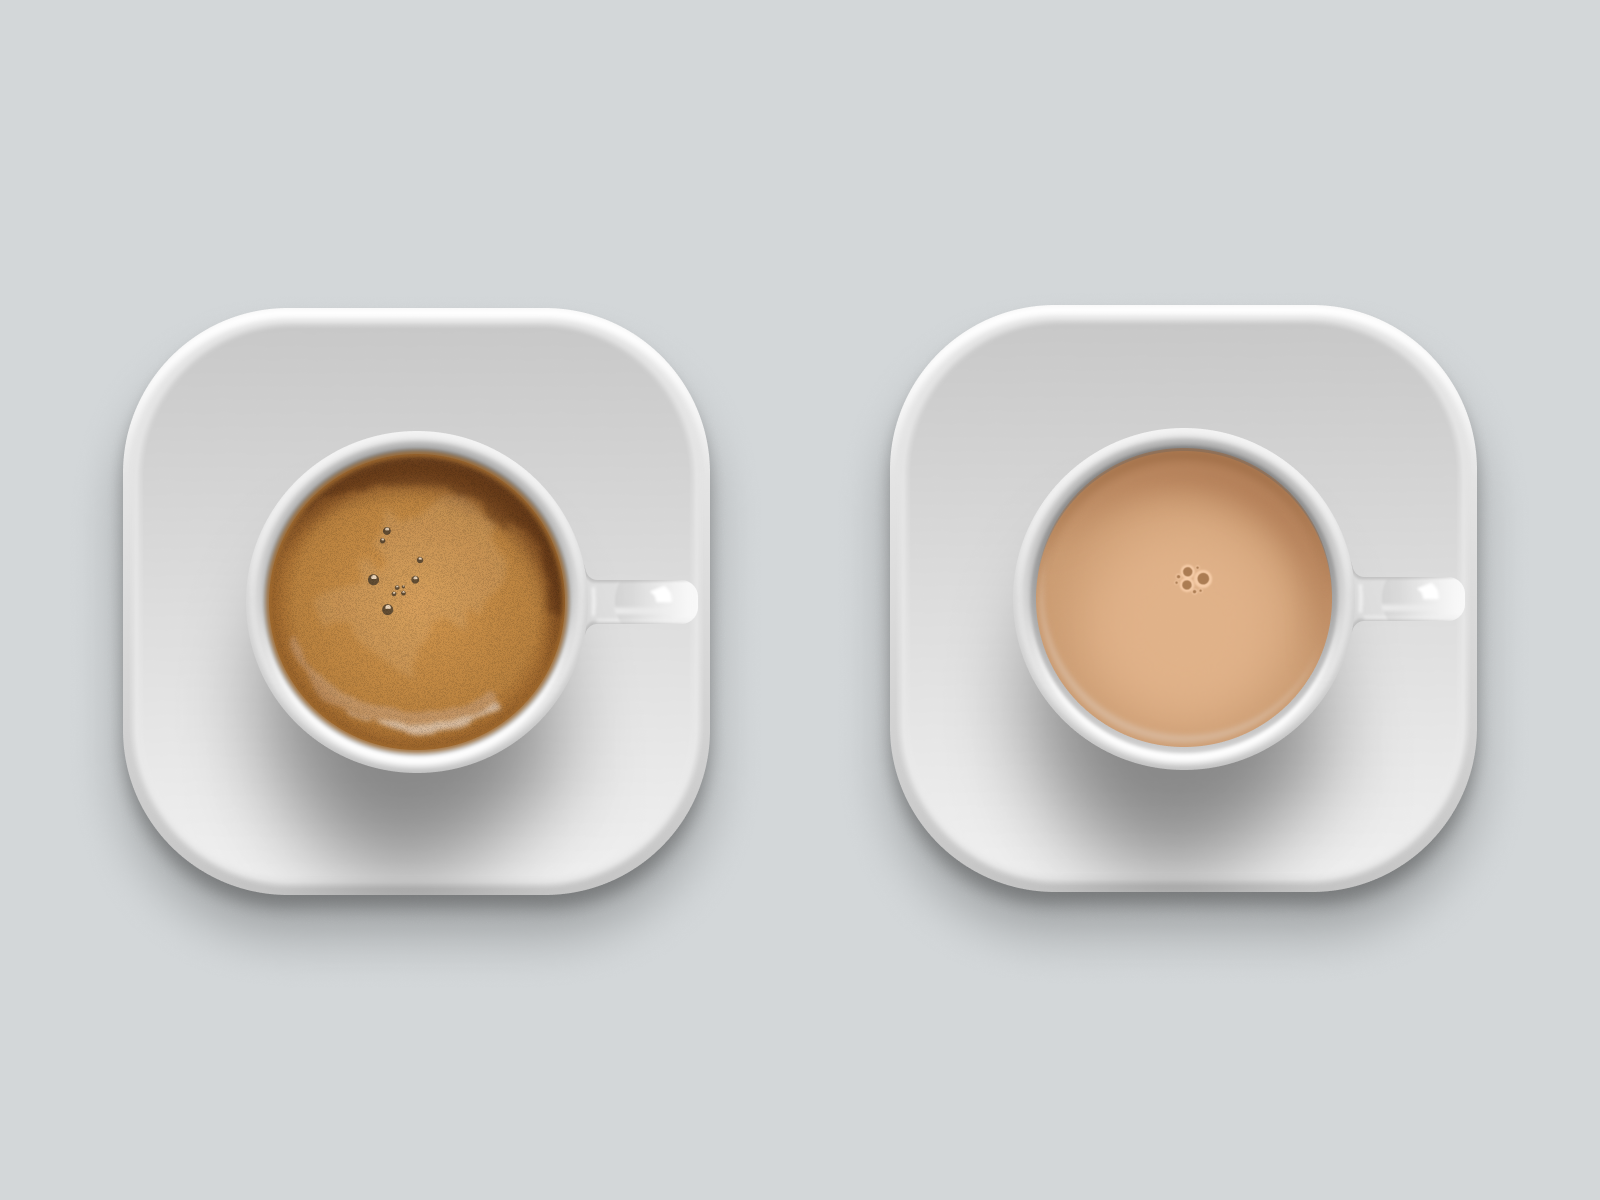 One lump or two by Damian Kidd on Dribbble